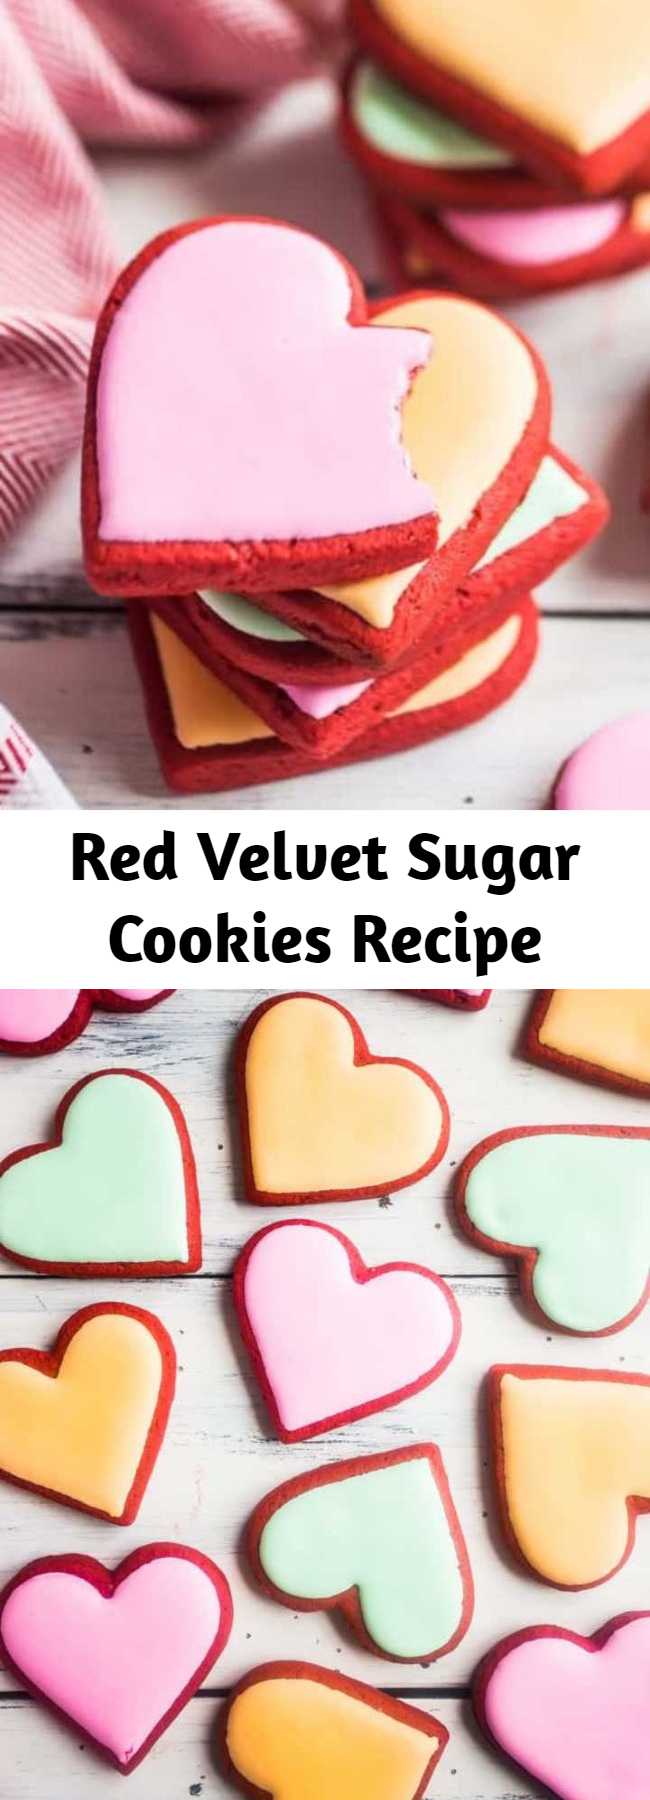 Red Velvet Sugar Cookies Recipe - These red velvet sugar cookies will make your day! Soft & tender, fun & brightly colored, with a hint of cocoa & a slight cream cheese tang. #redvelvet #cookies #recipe #dessert #valentinesday #fromscratch #easy #christmas #withcreamcheese #valentinesday #cutout #homemade #best #chewy #soft #heart #simple #decorated #moist #creamcheese #nochill #sugar